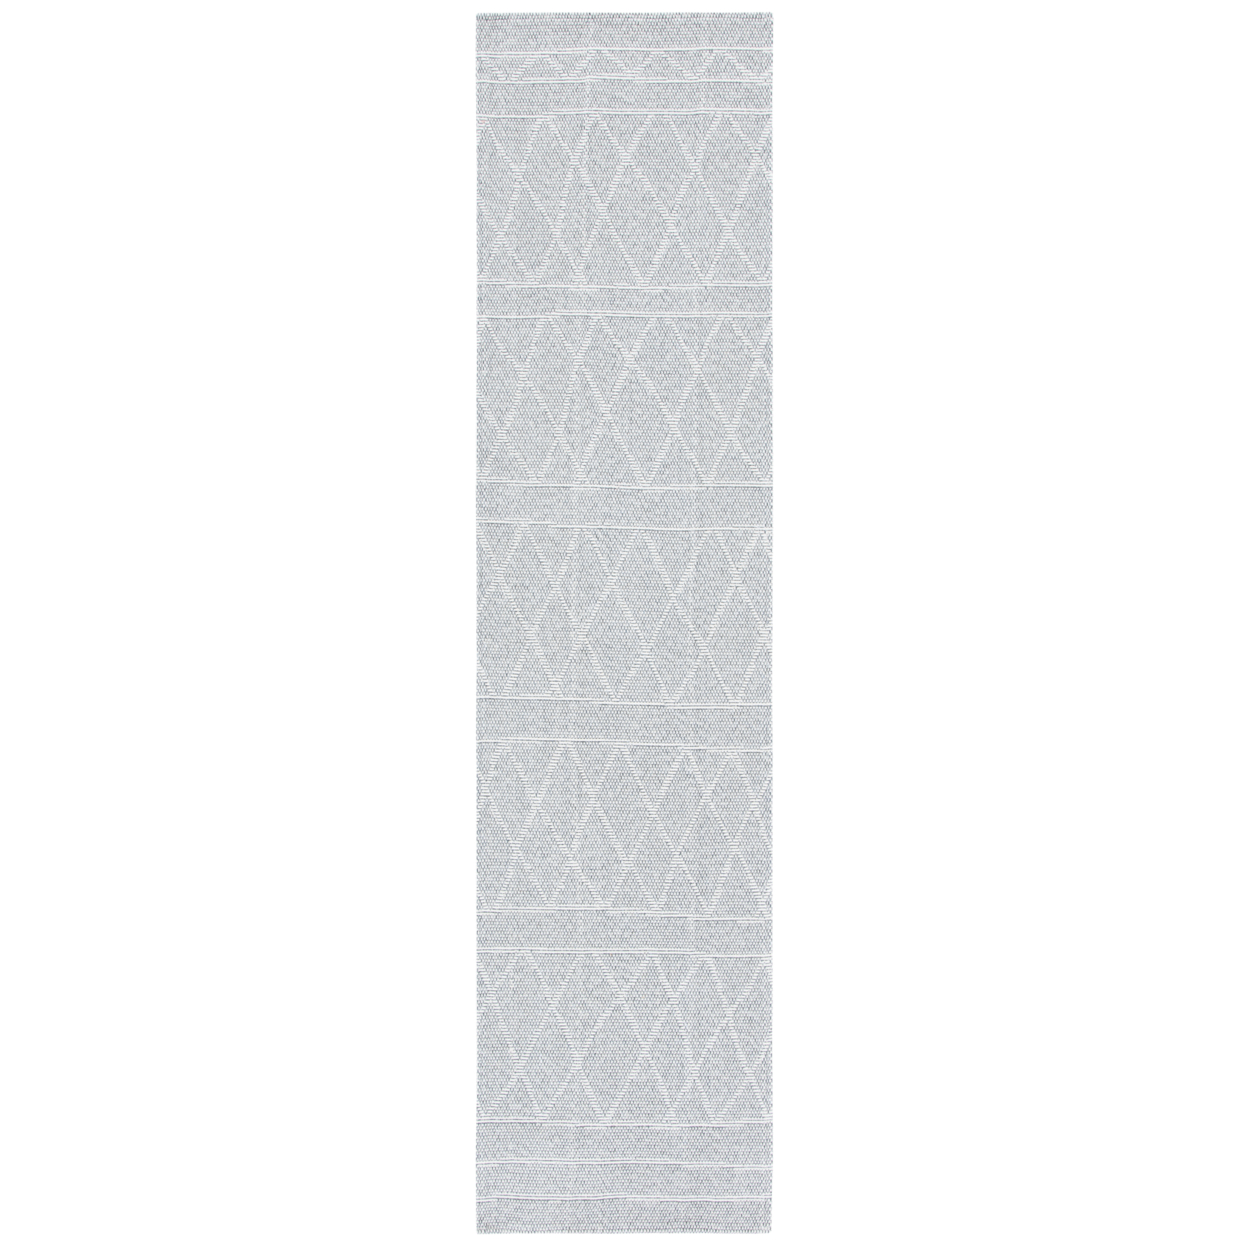 SAFAVIEH Augustine Collection AGT474A Grey / Ivory Rug - 9' X 12'